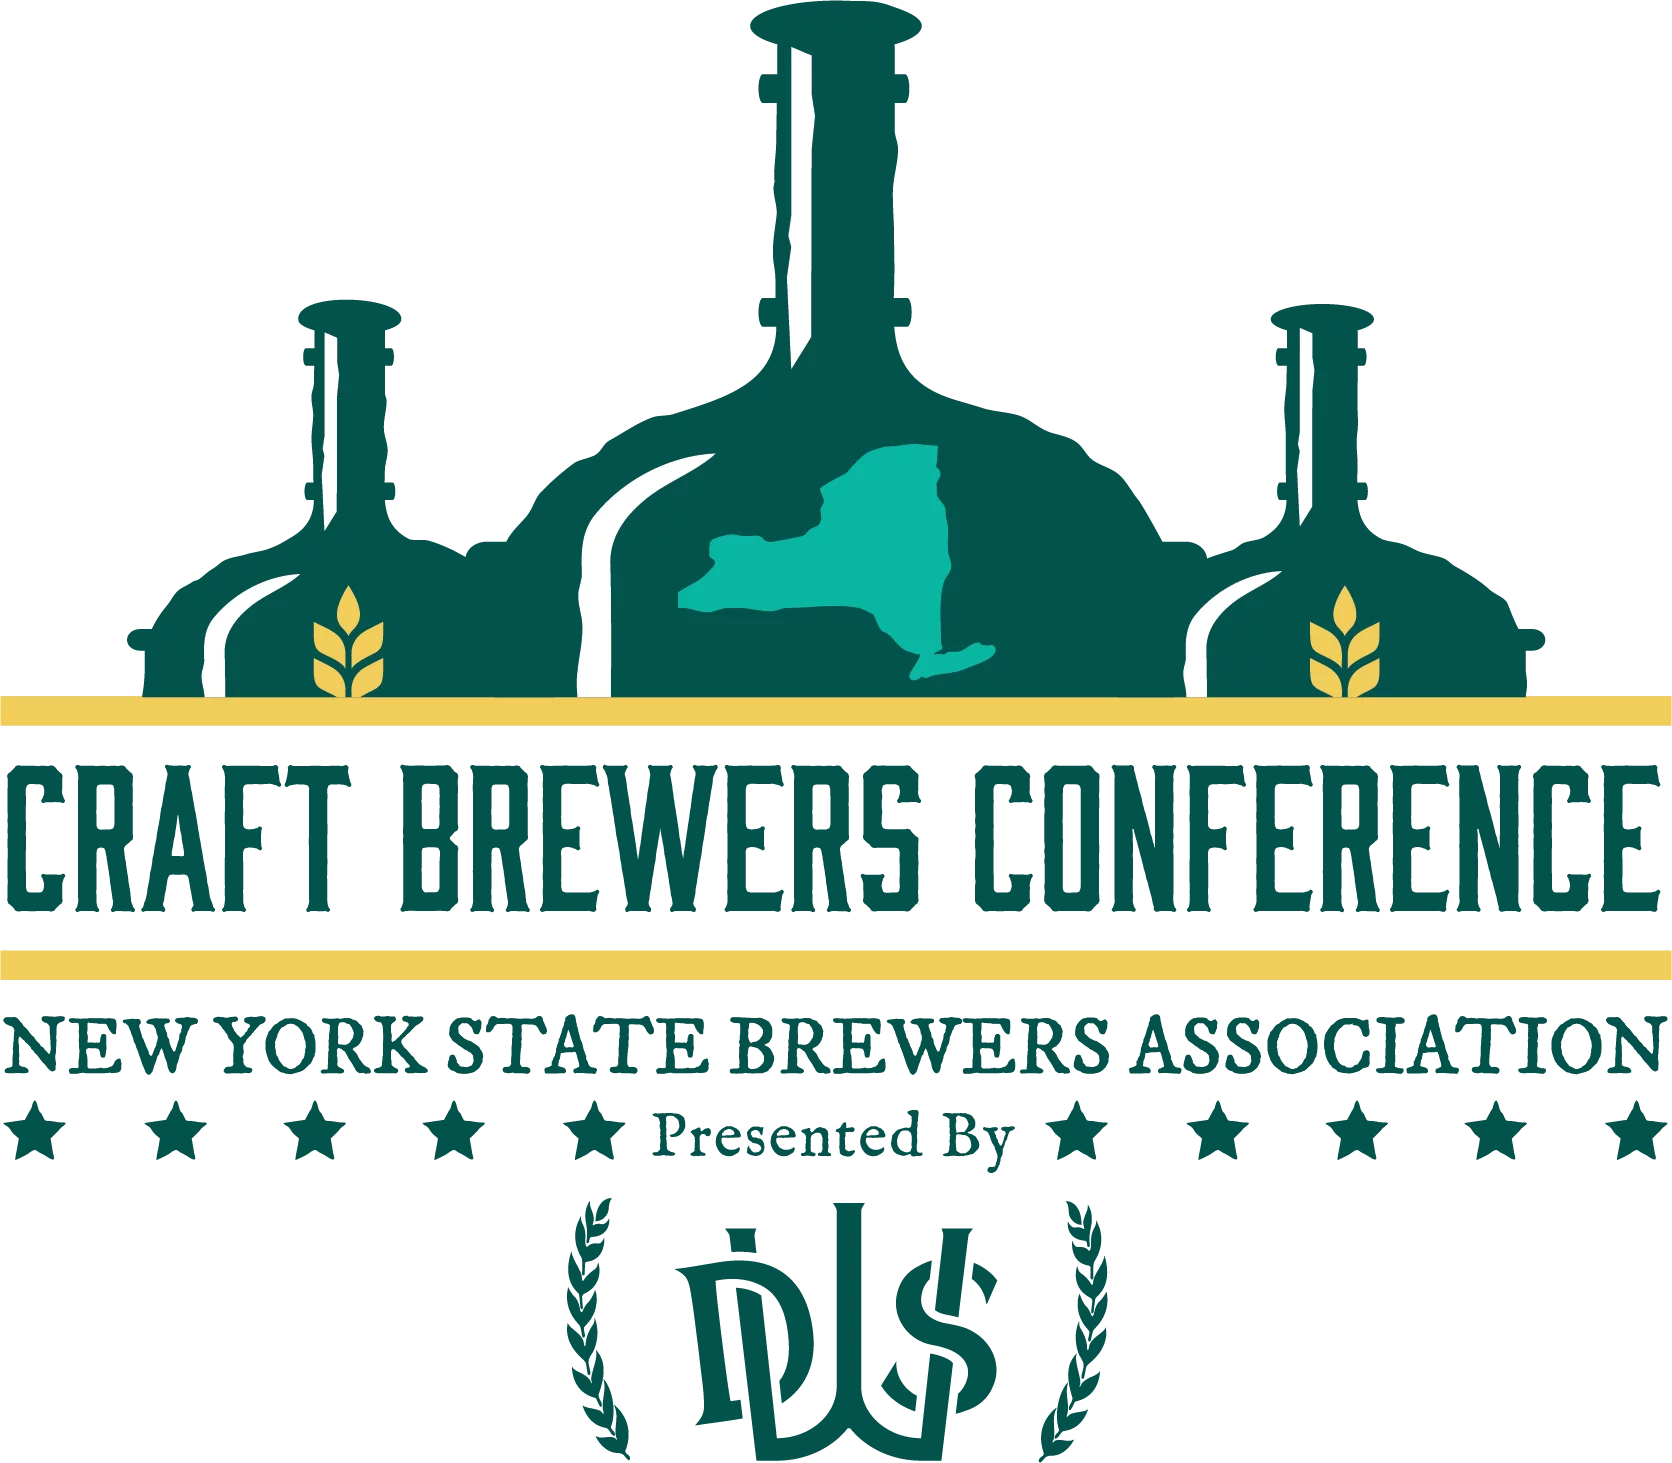 new york craft brewers conference